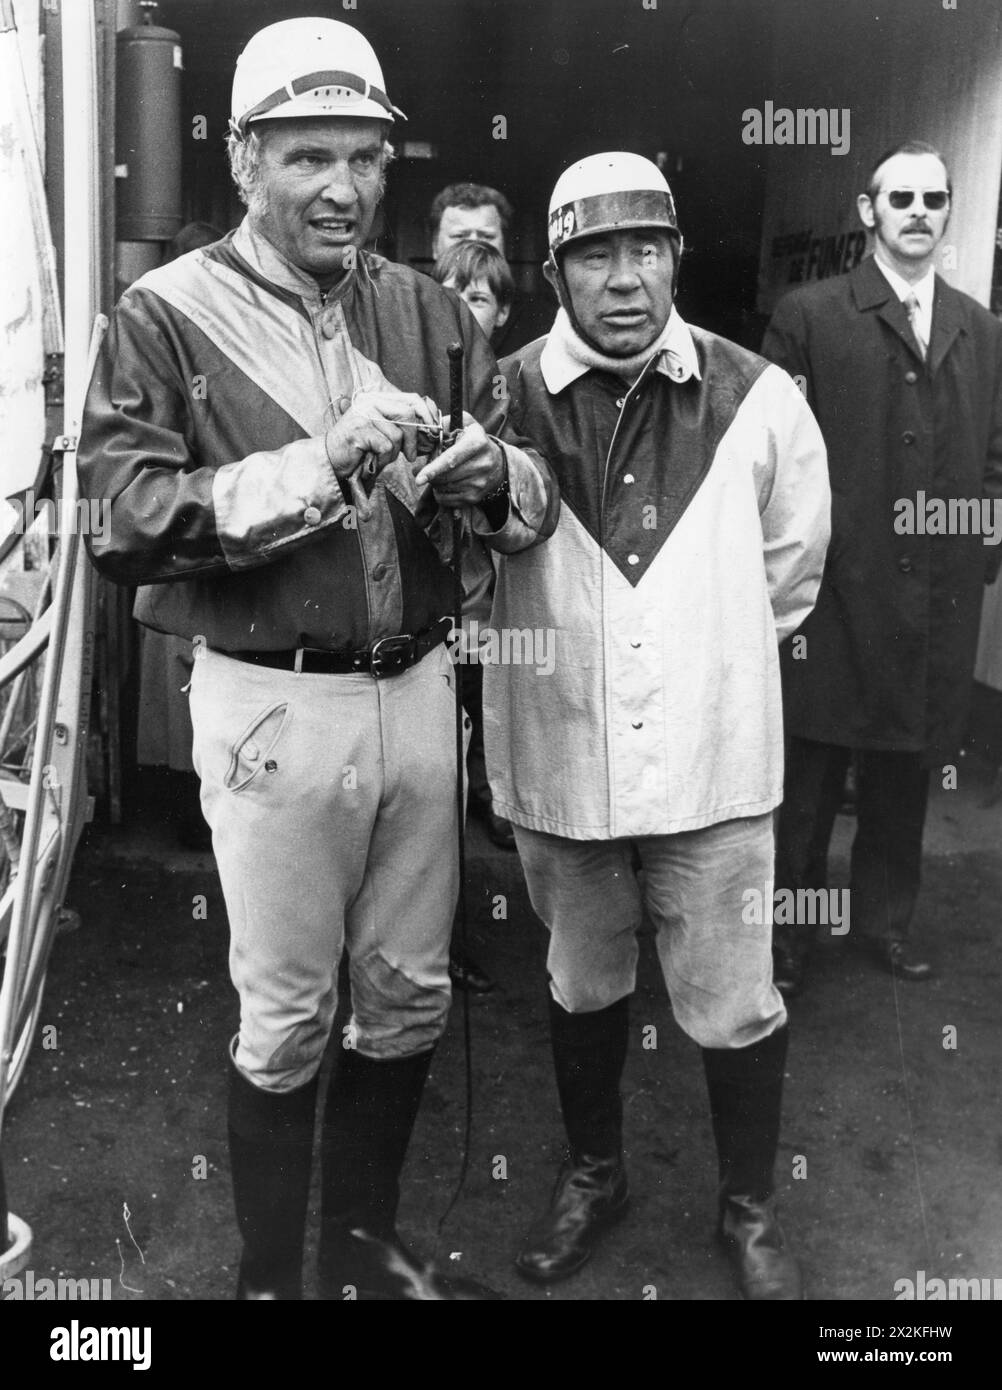 Schmid, Helmut, 8.4.1925 - 18.7.1992, German actor, with Franz Muxeneder, celibrities trotting race, ADDITIONAL-RIGHTS-CLEARANCE-INFO-NOT-AVAILABLE Stock Photo